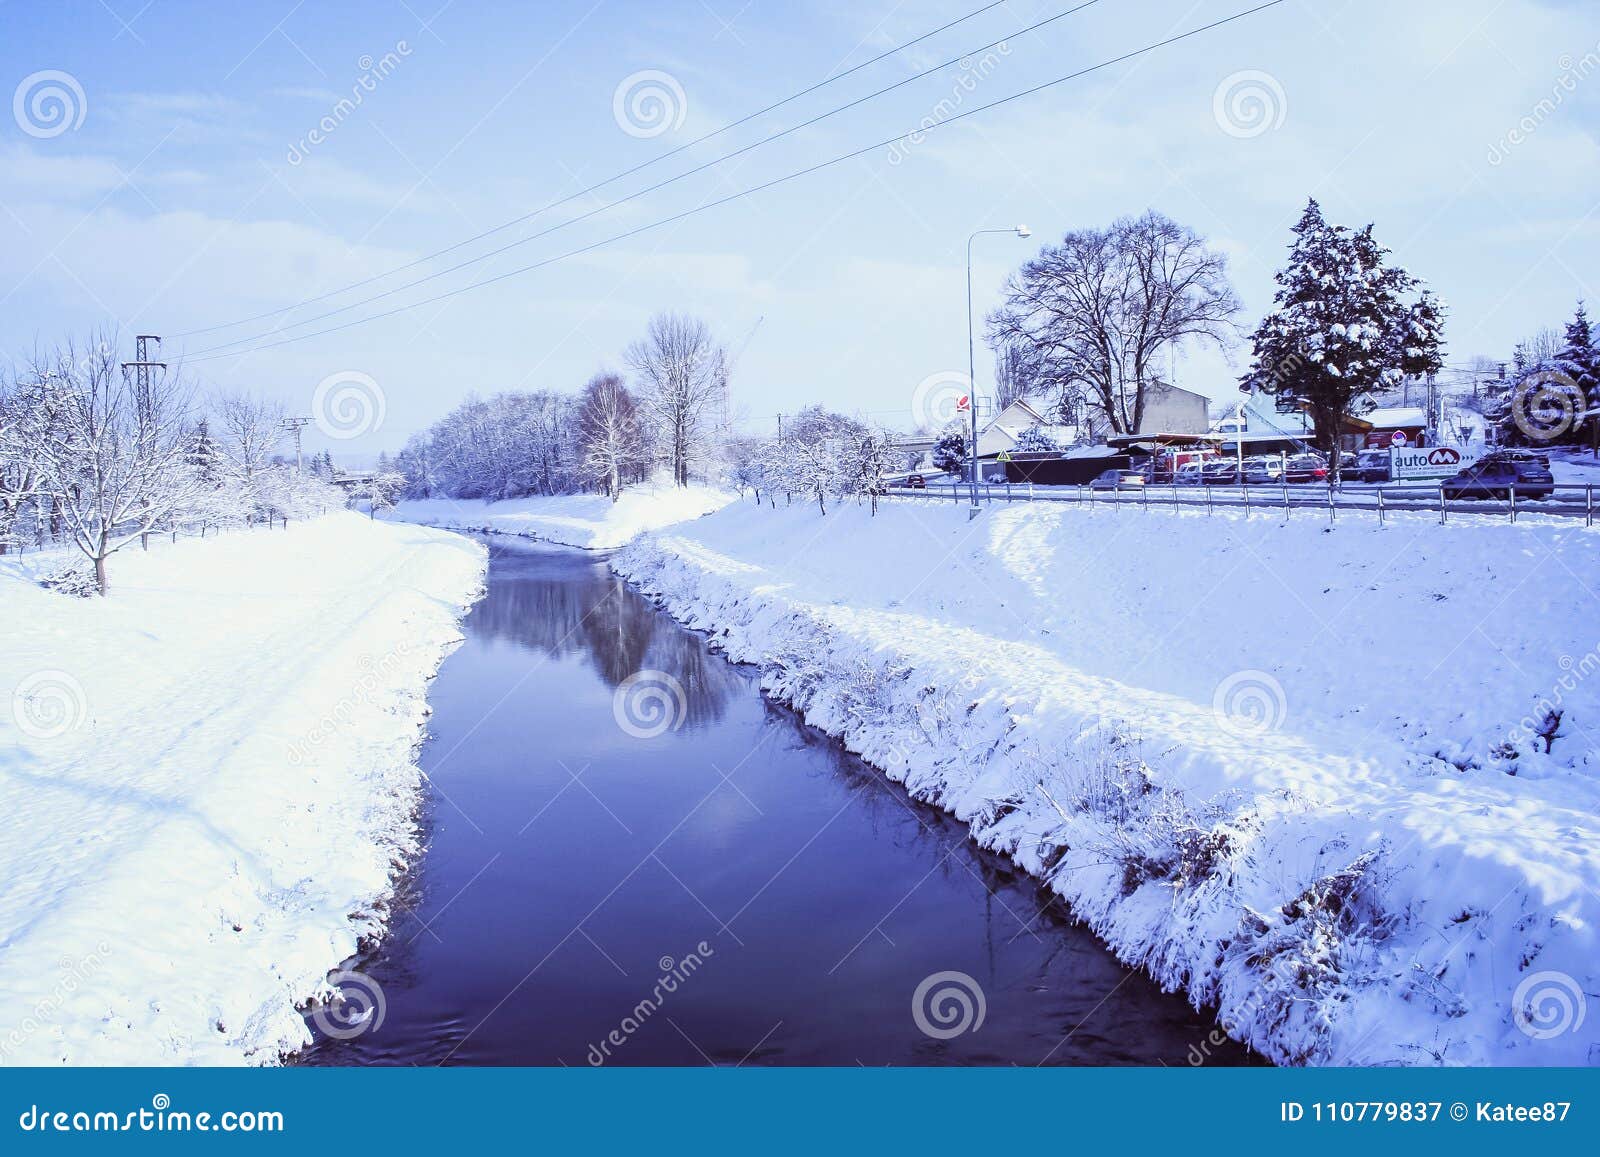 Winter Landscape with a Rich Snowflake Stock Image - Image of forbidden ...